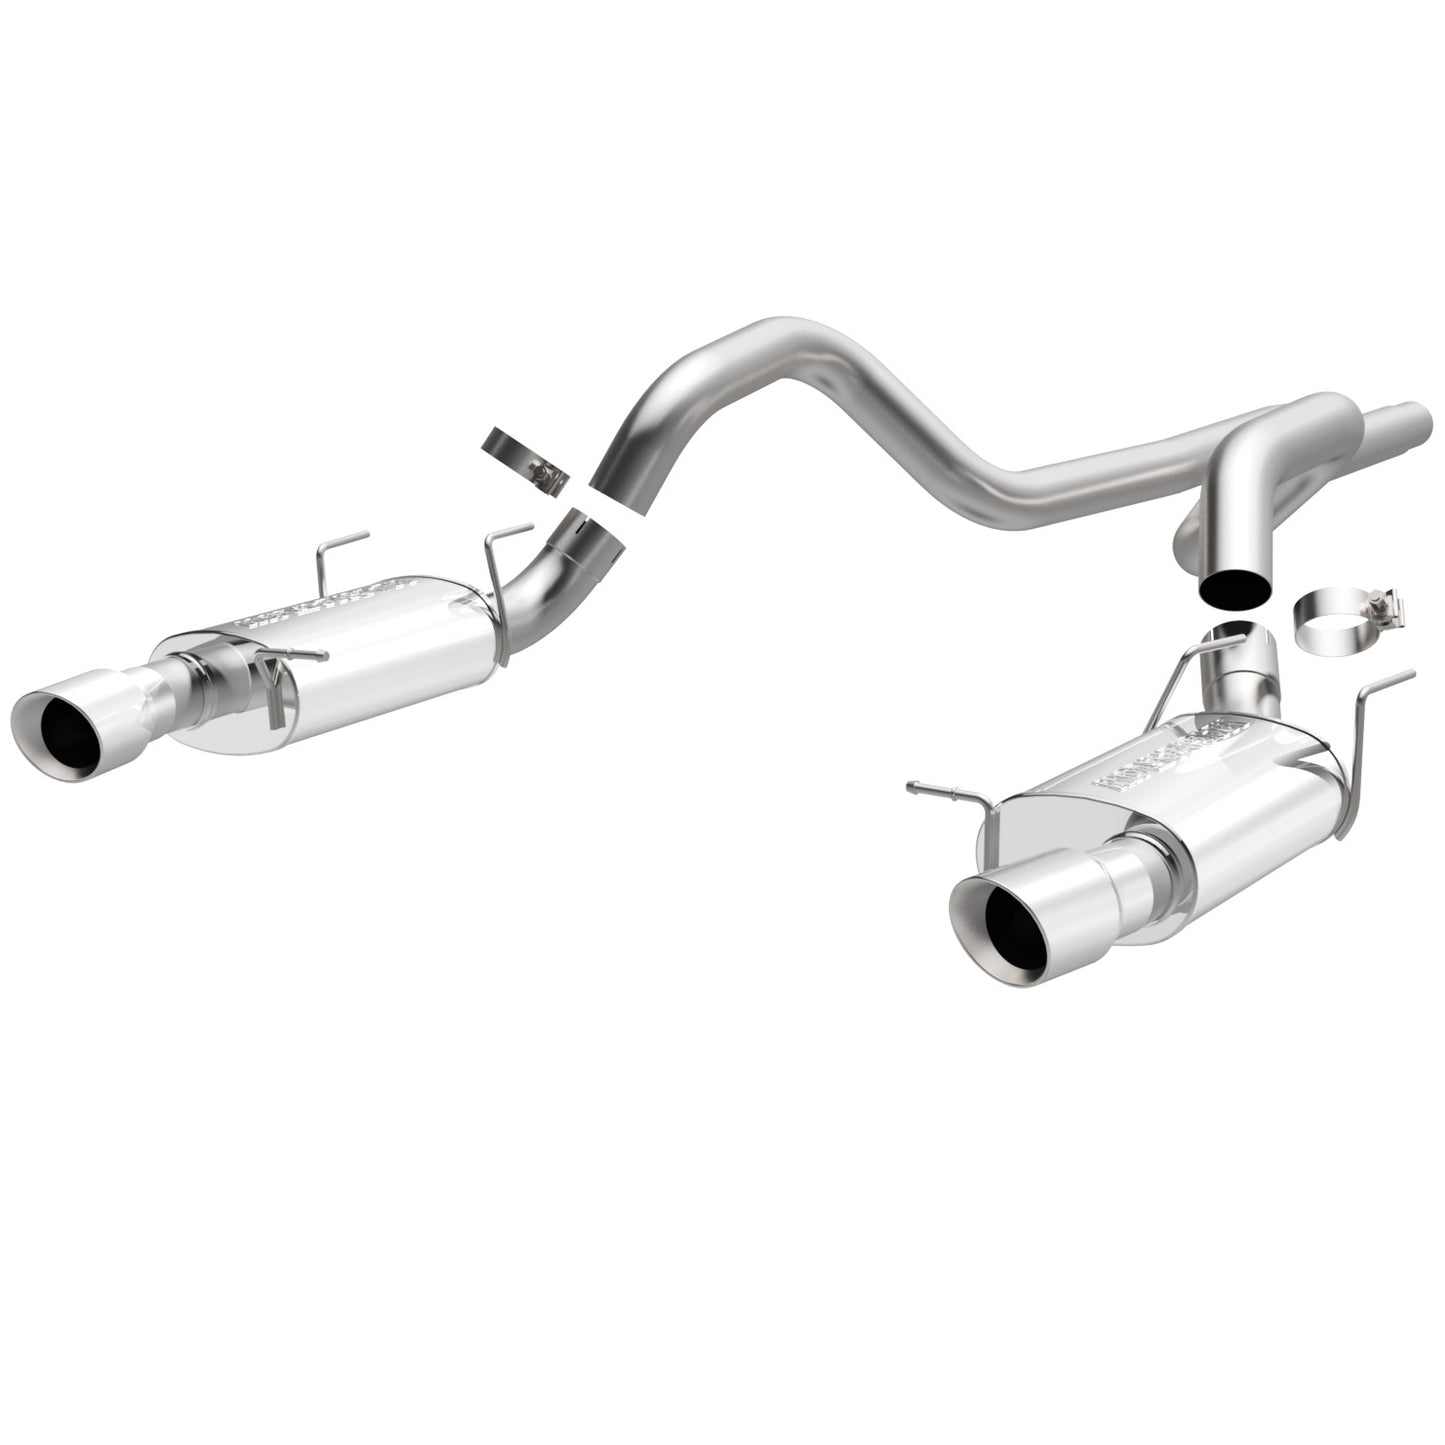 MagnaFlow 2011-2012 Ford Mustang Street Series Cat-Back Performance Exhaust System